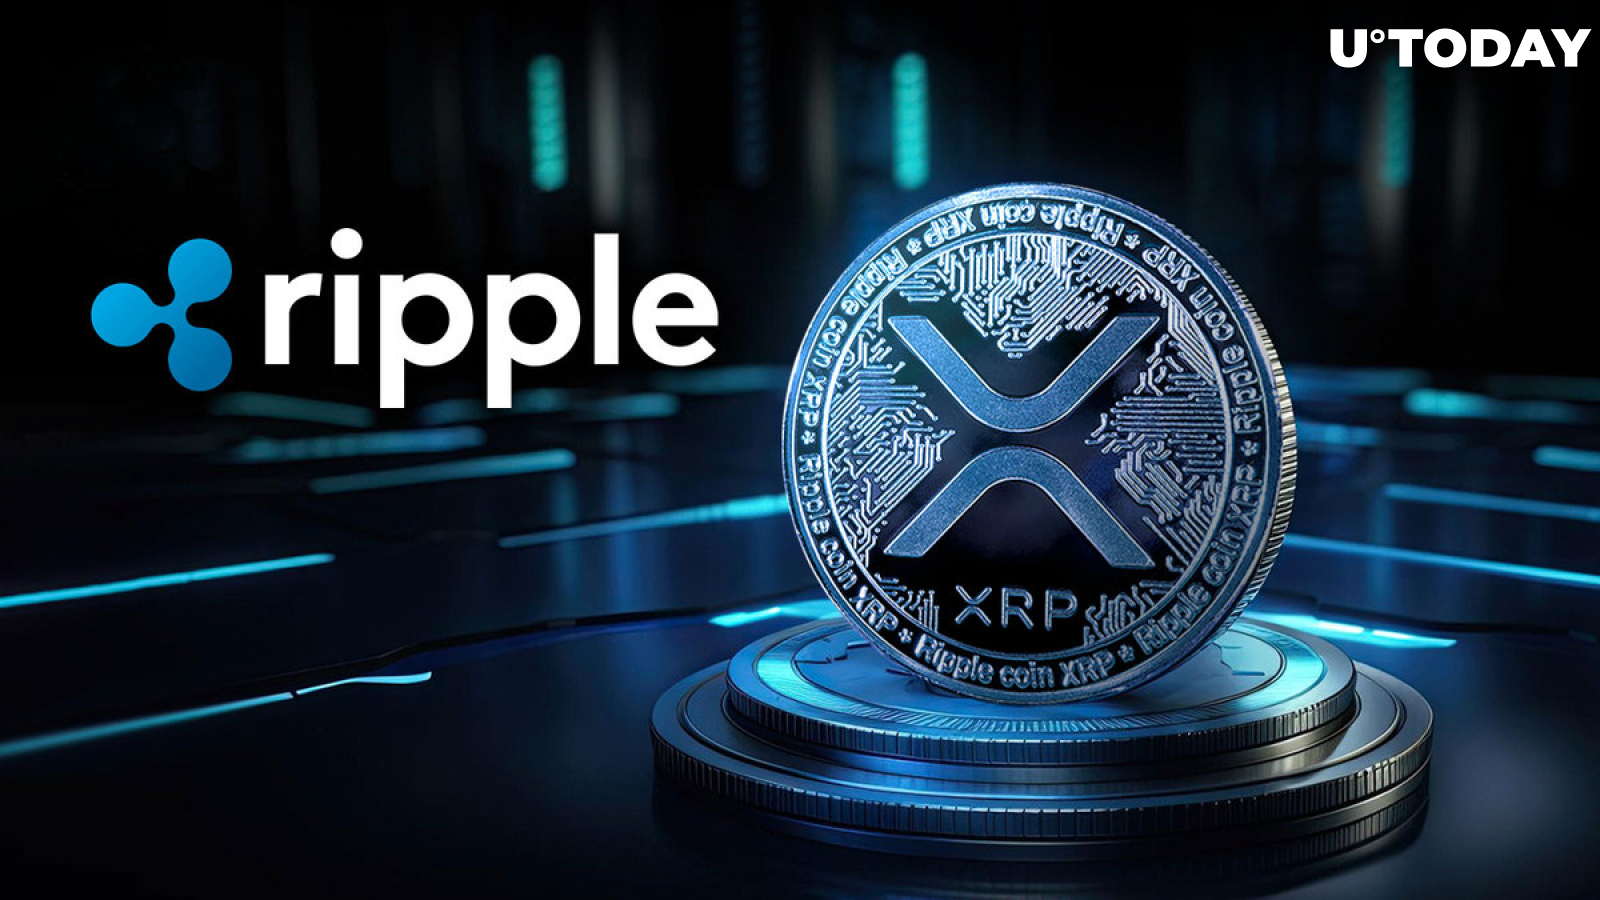 Ripple Moves 97 Million XRP as Price Rises, Community Intrigued